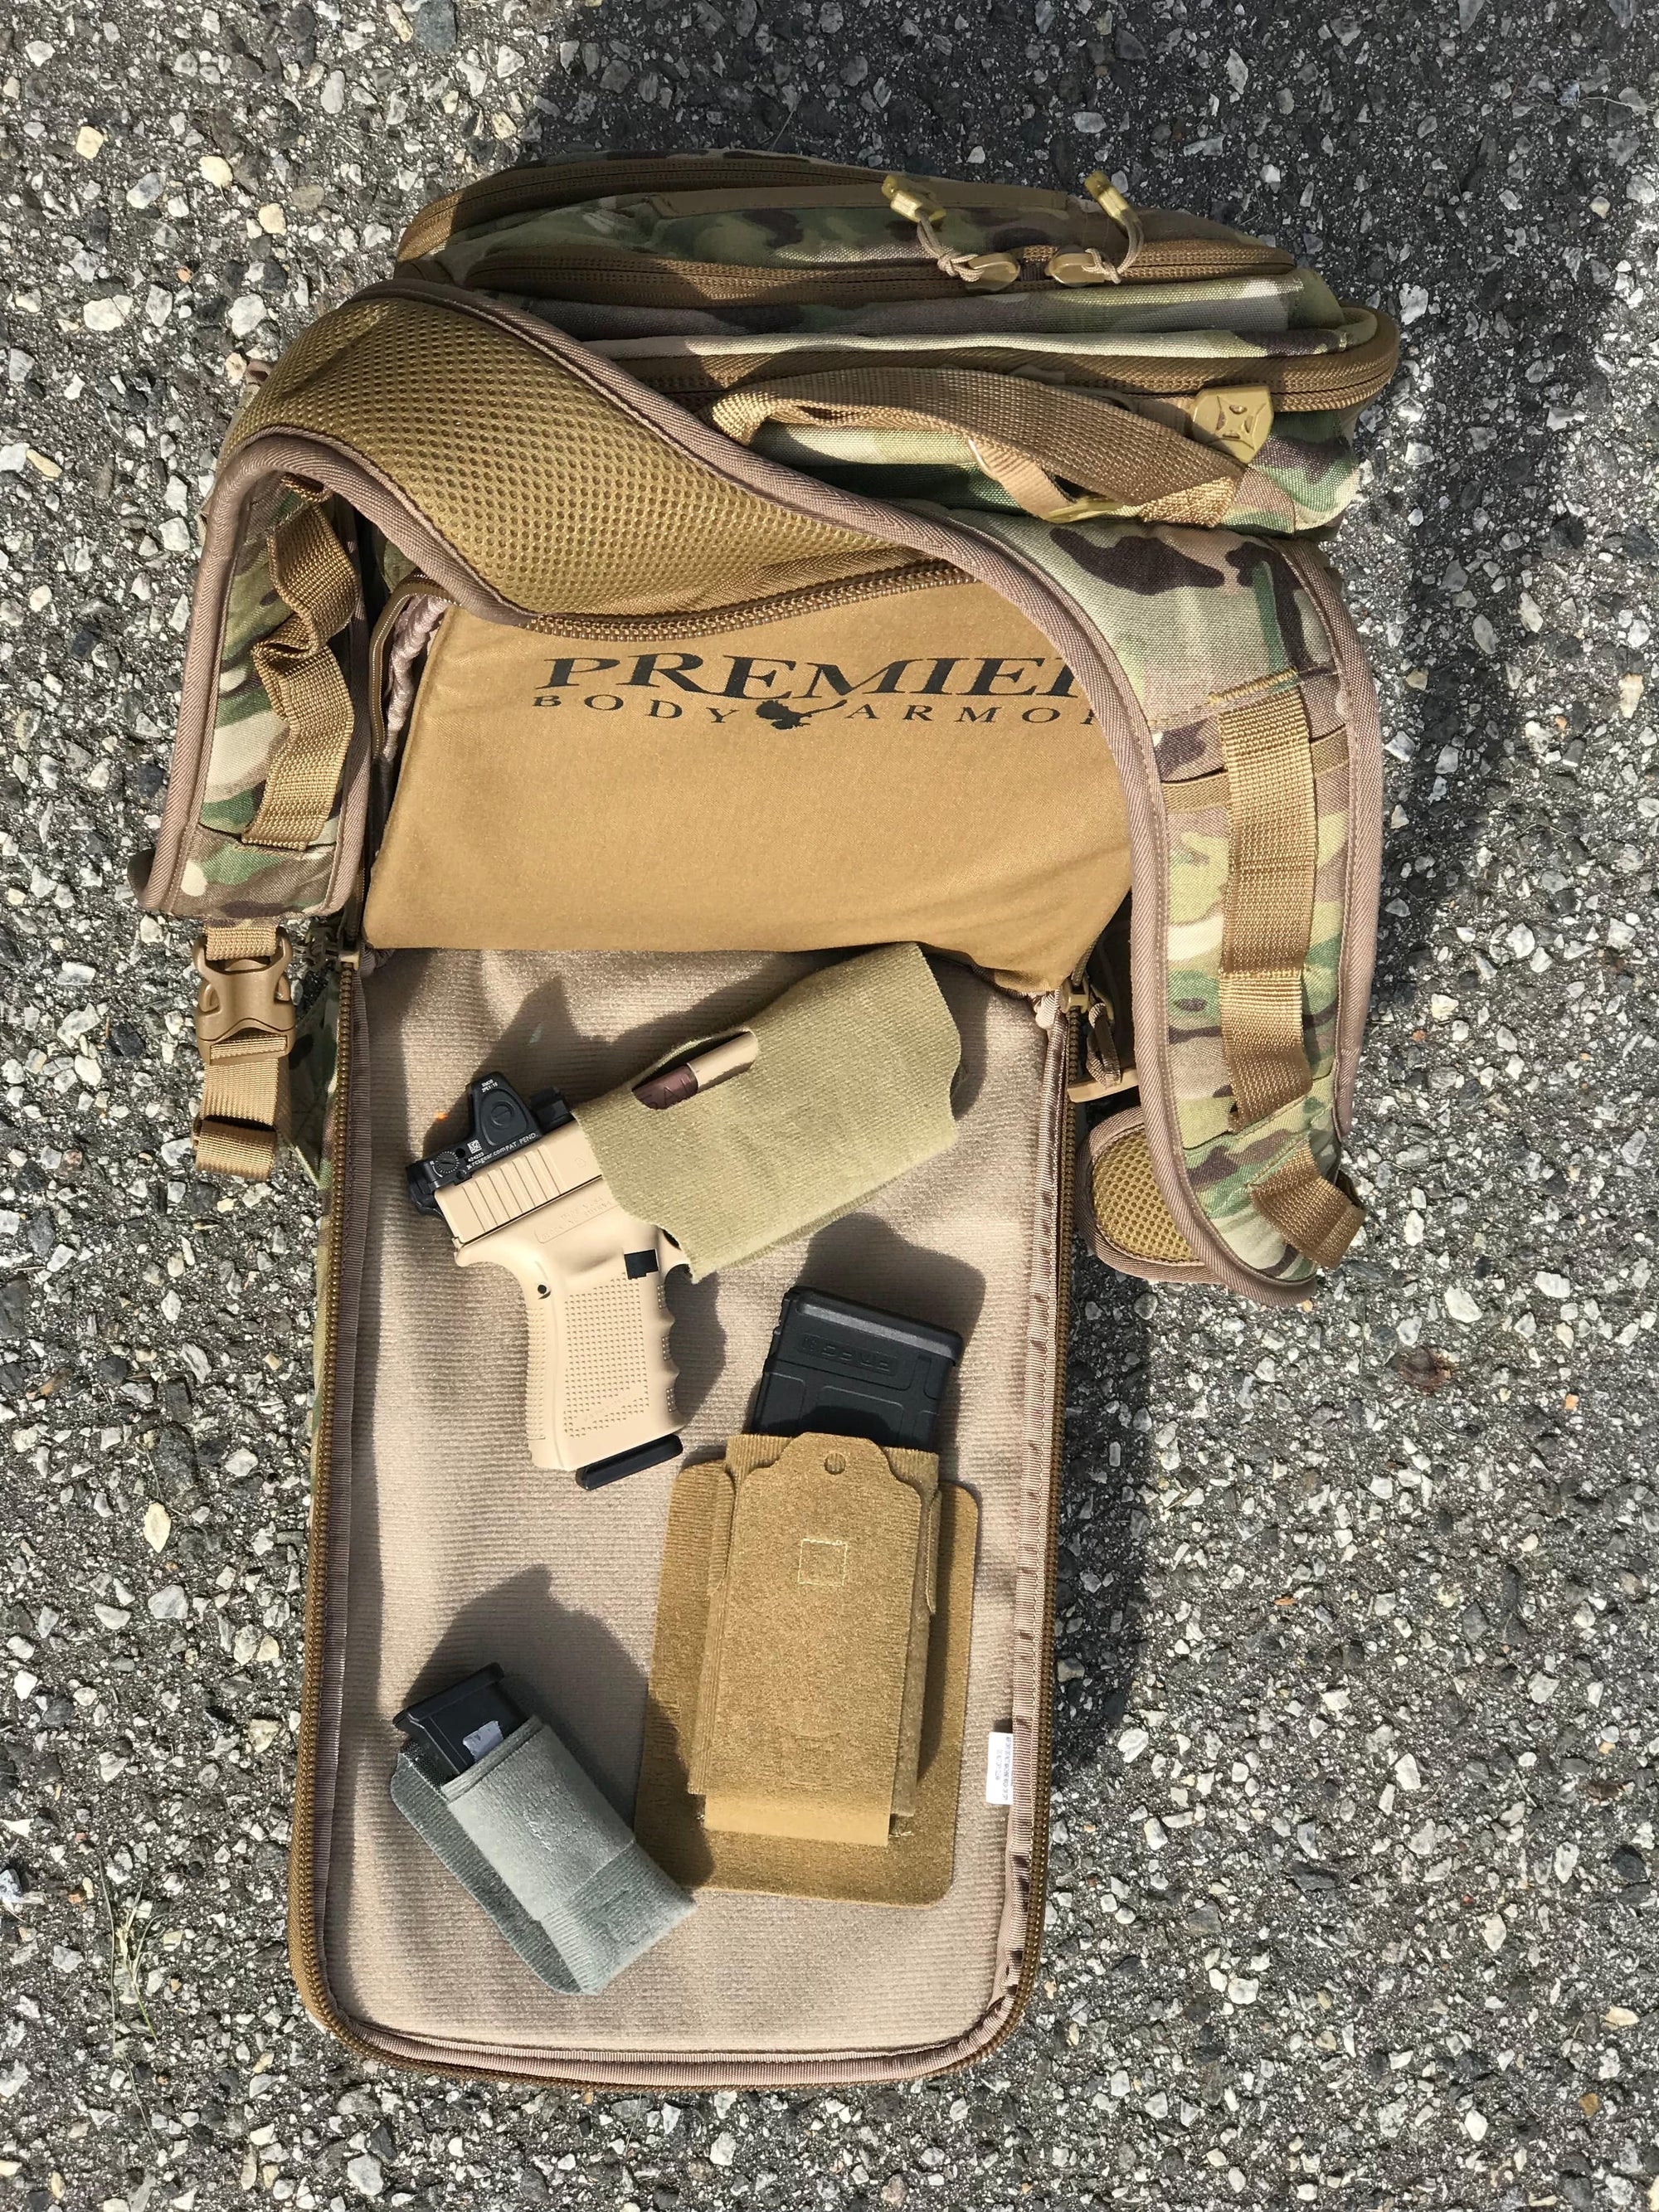 Image of Vertx MAK Full. Hold mags, flashlights, call phones, and more!